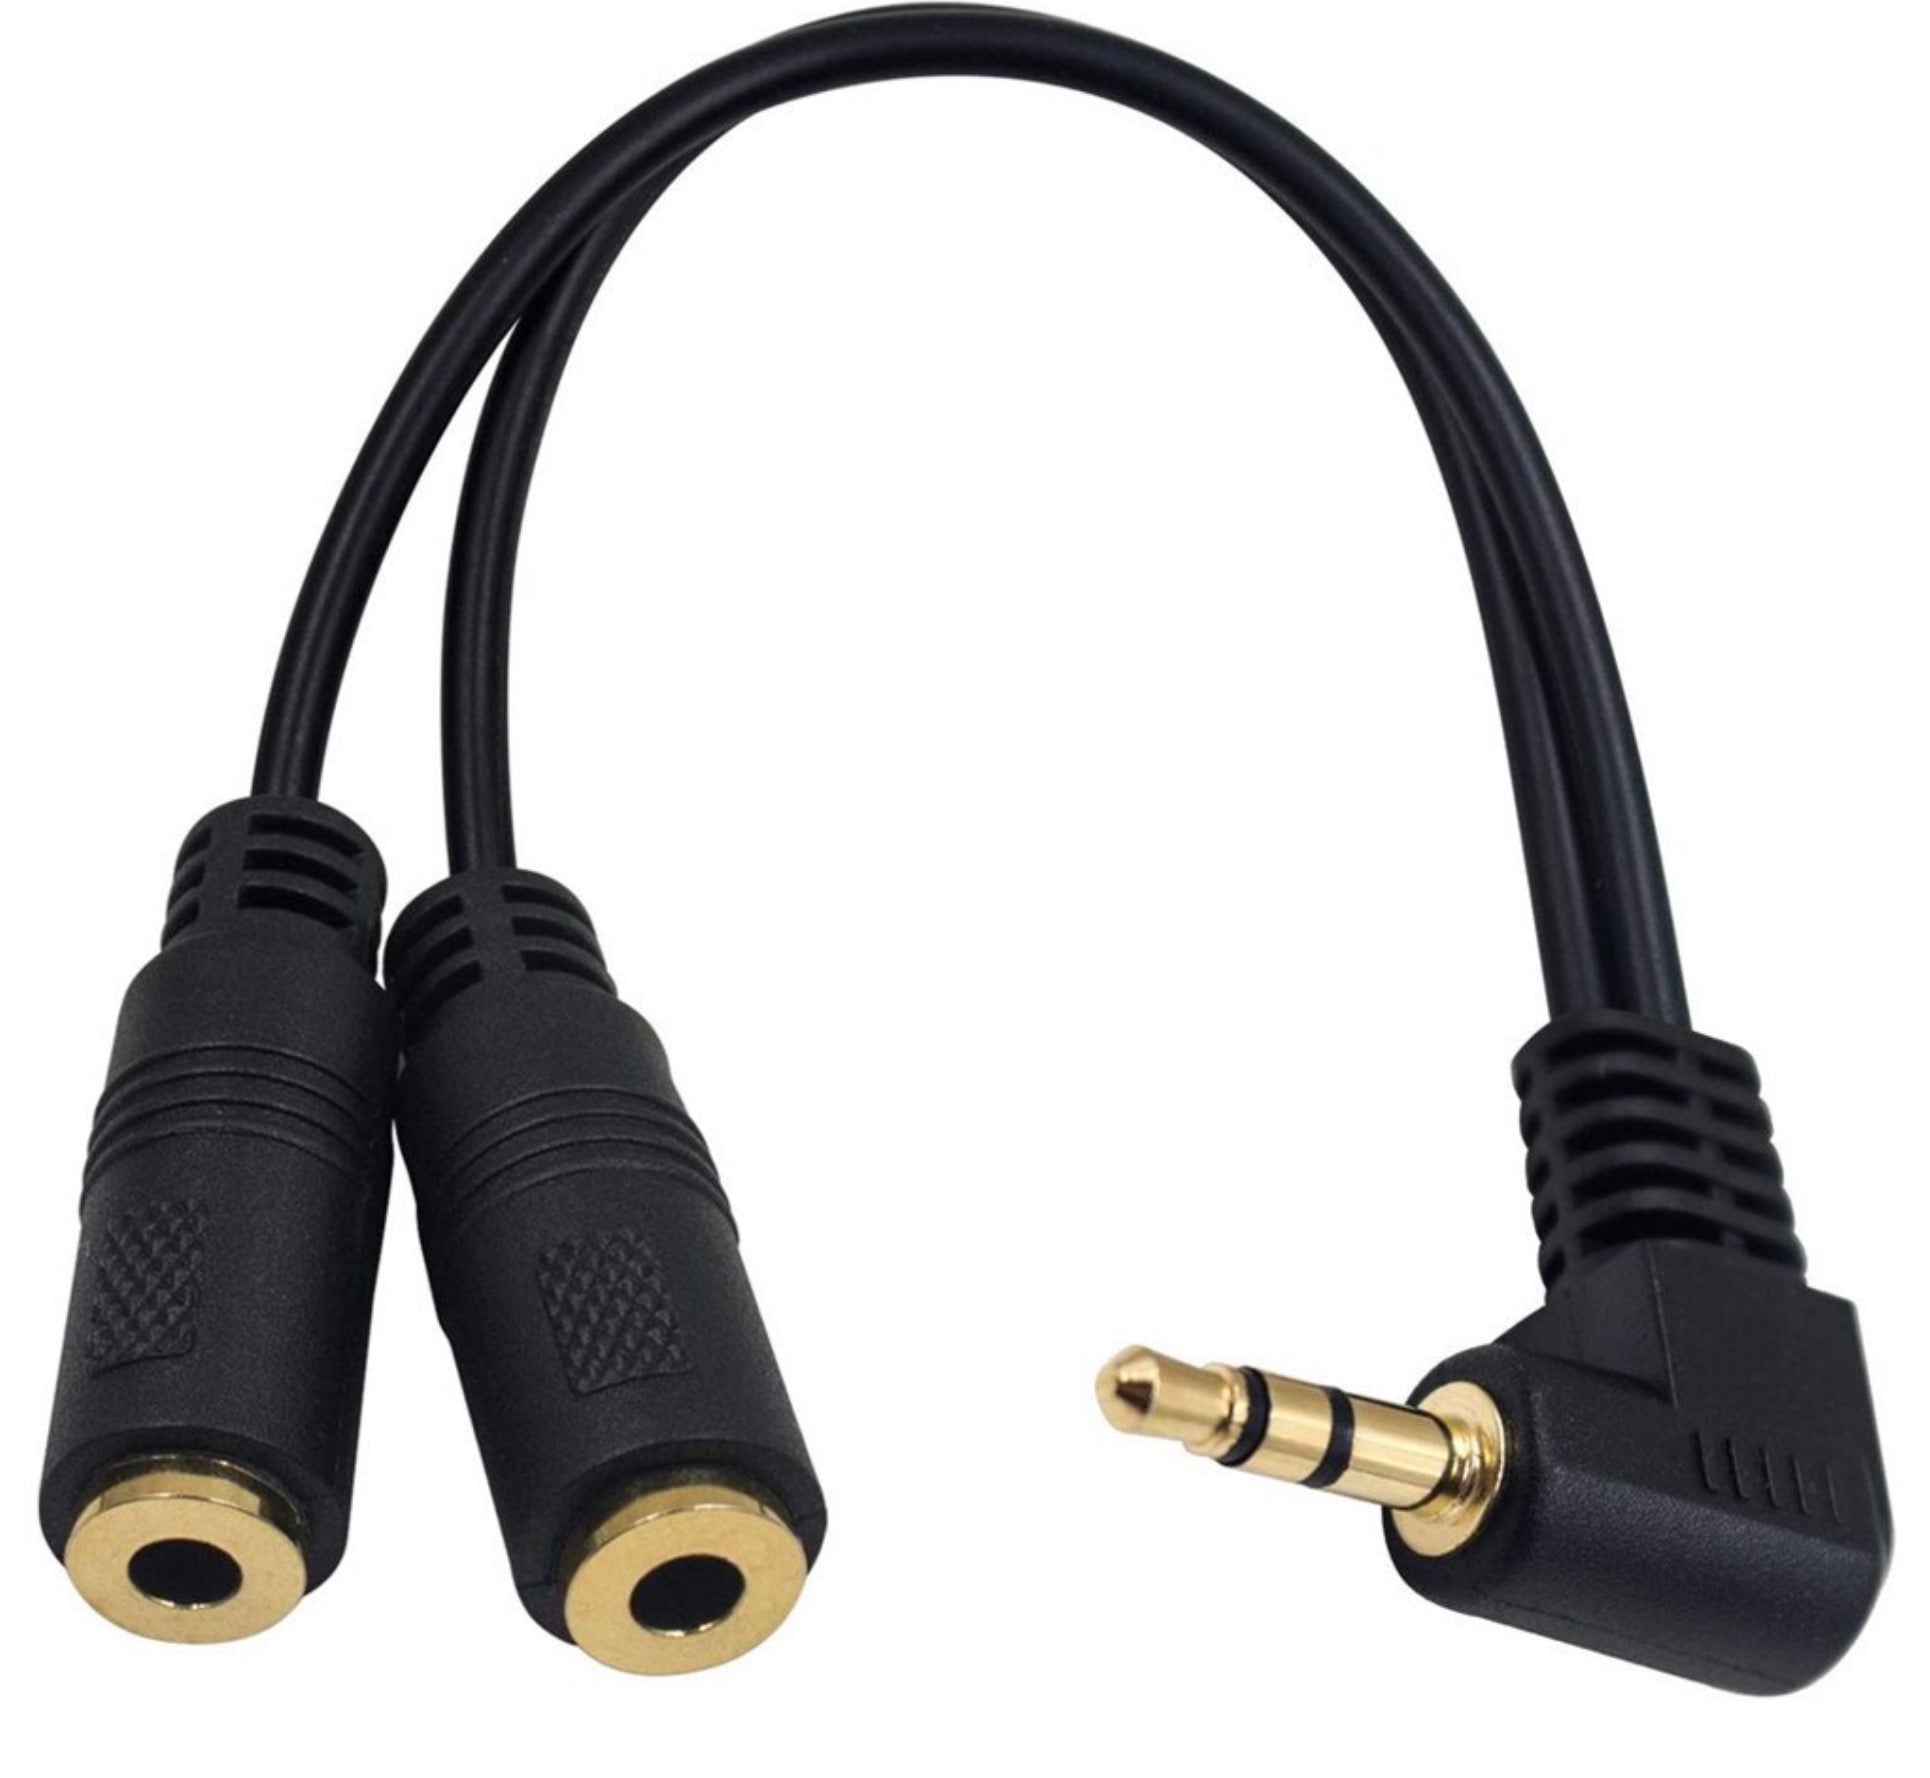 3.5mm 3 Pole Male to Dual 3.5mm Female Headphone Audio Splitter Cable 0.15m